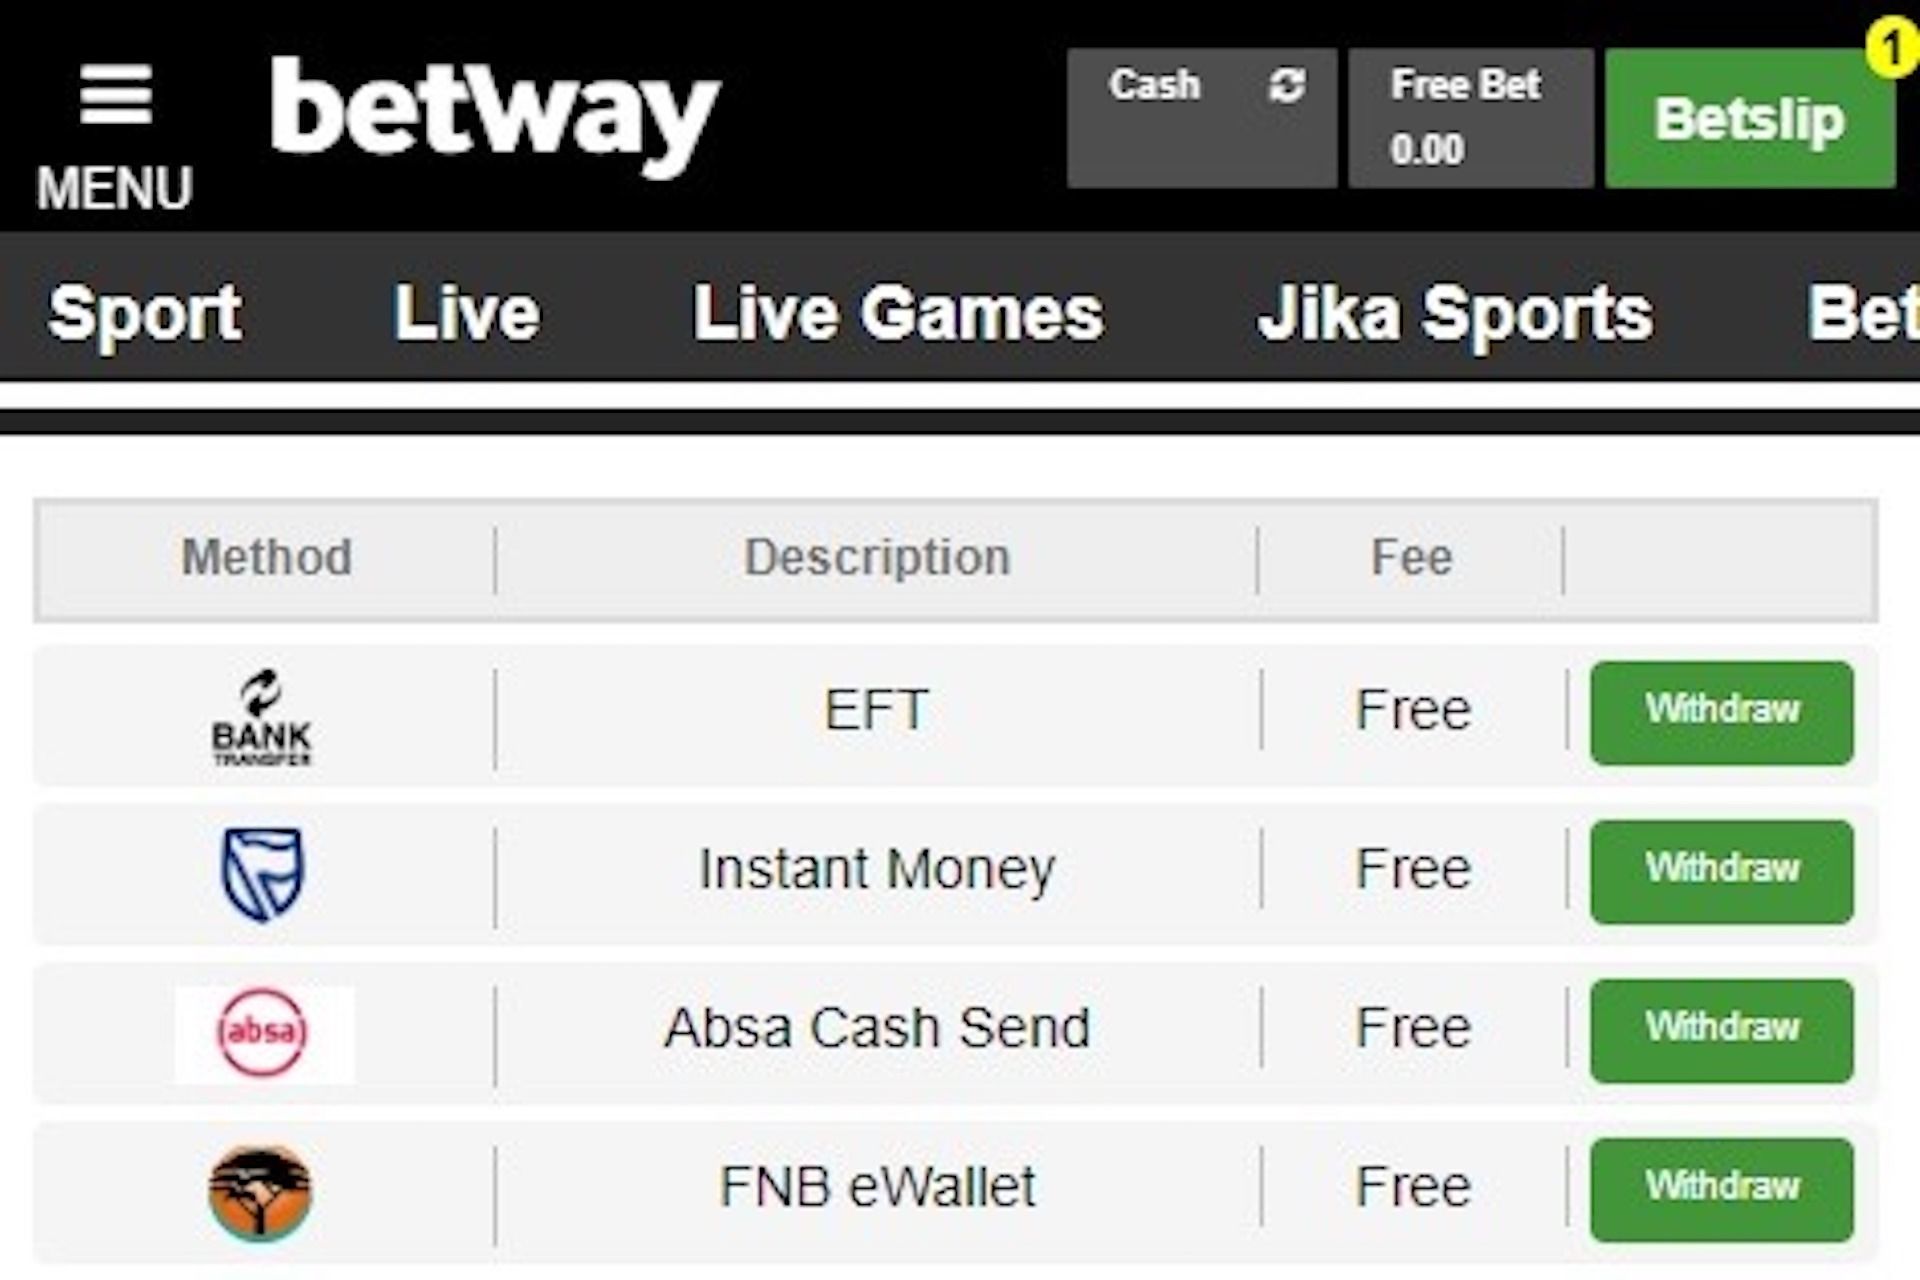 Betway Withdrawal Timing For Each Payment Method